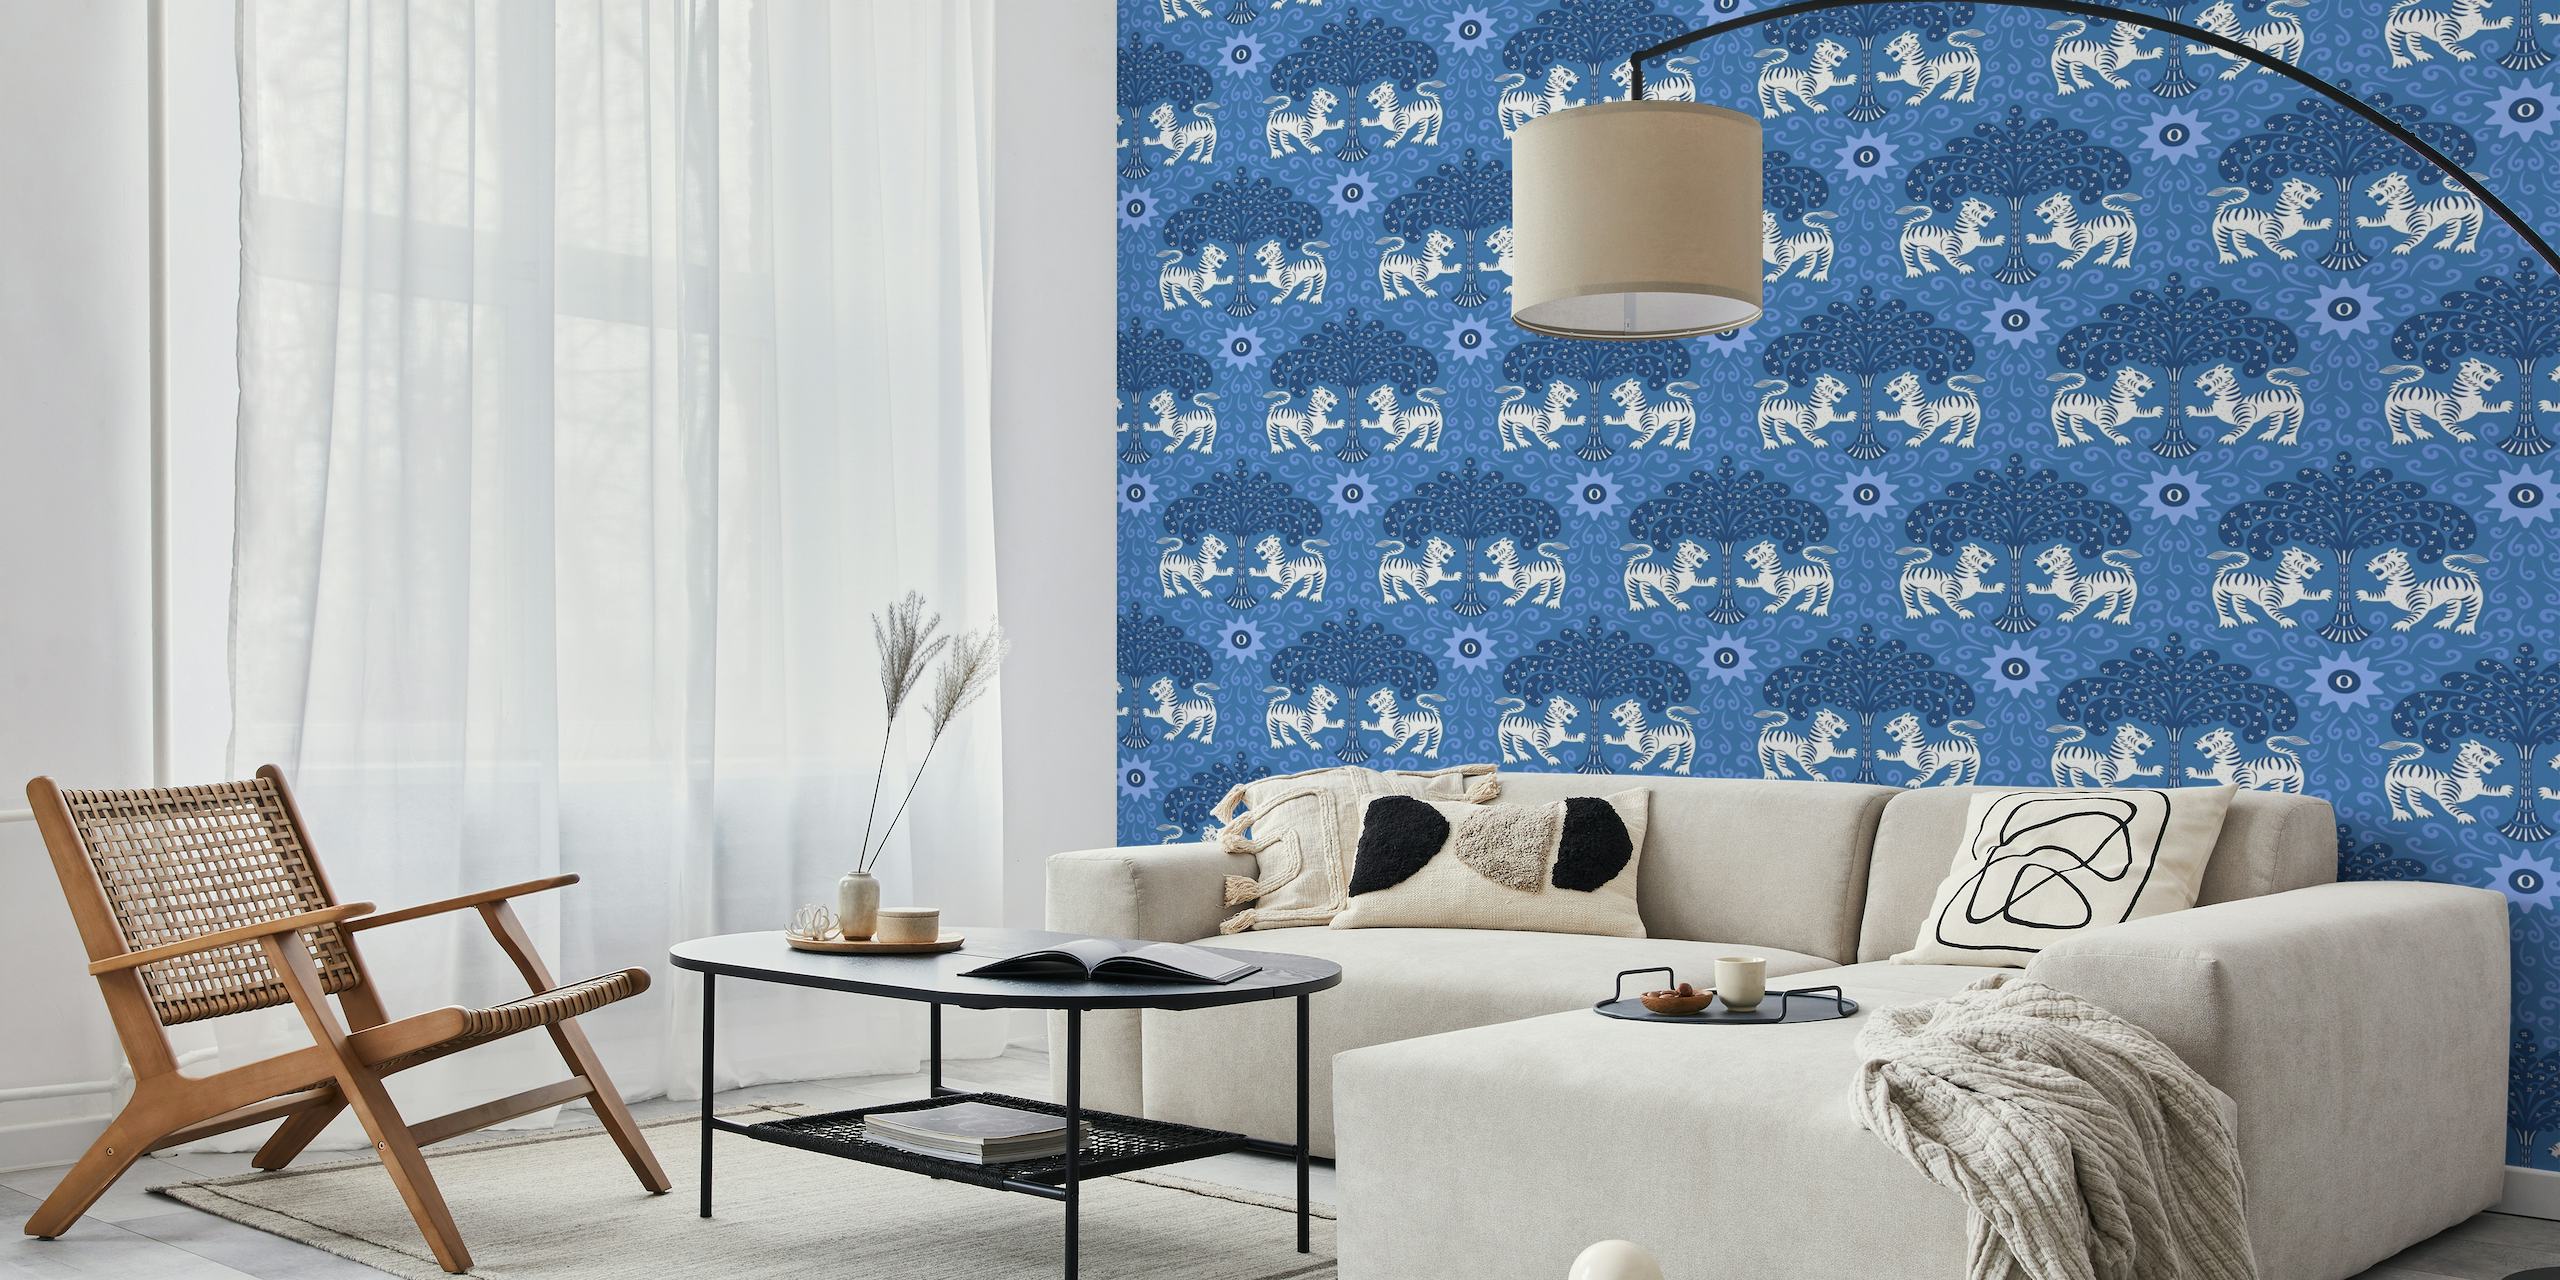 Blue and white tribal tiger pattern wall mural